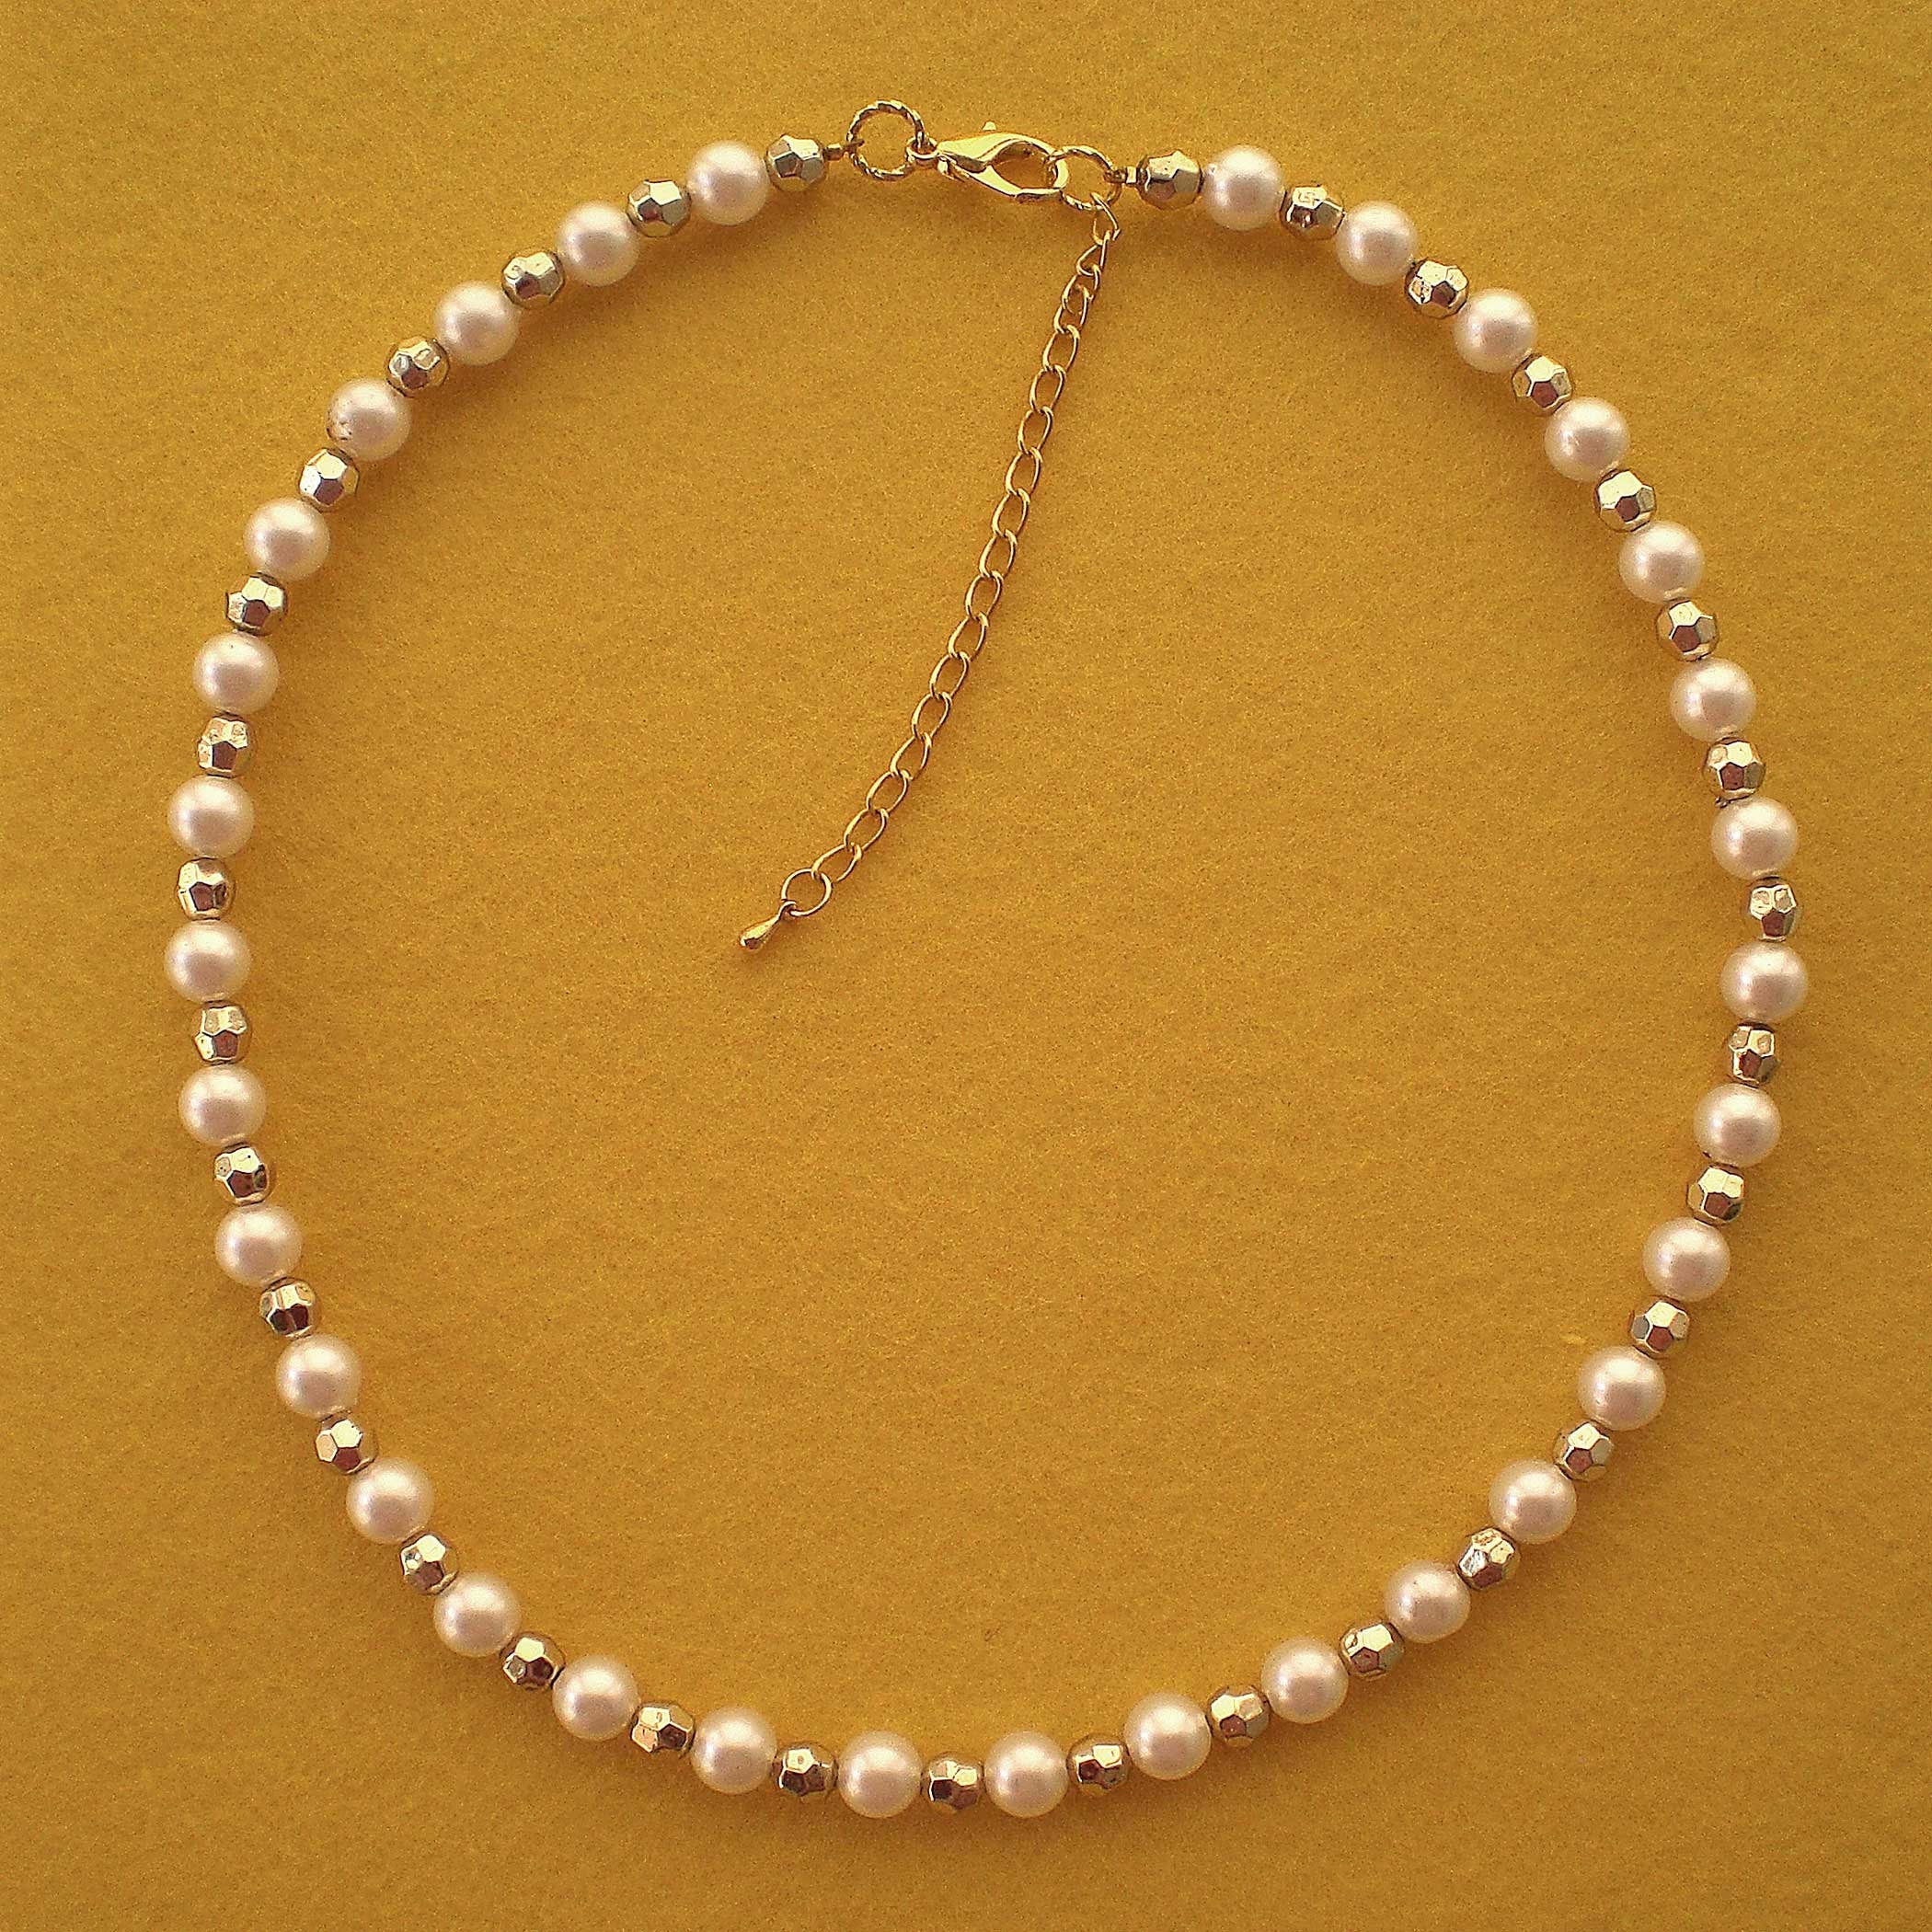 Gold and Pearl Bead Necklace Unique OOAK Handmade Jewellery - Etsy UK